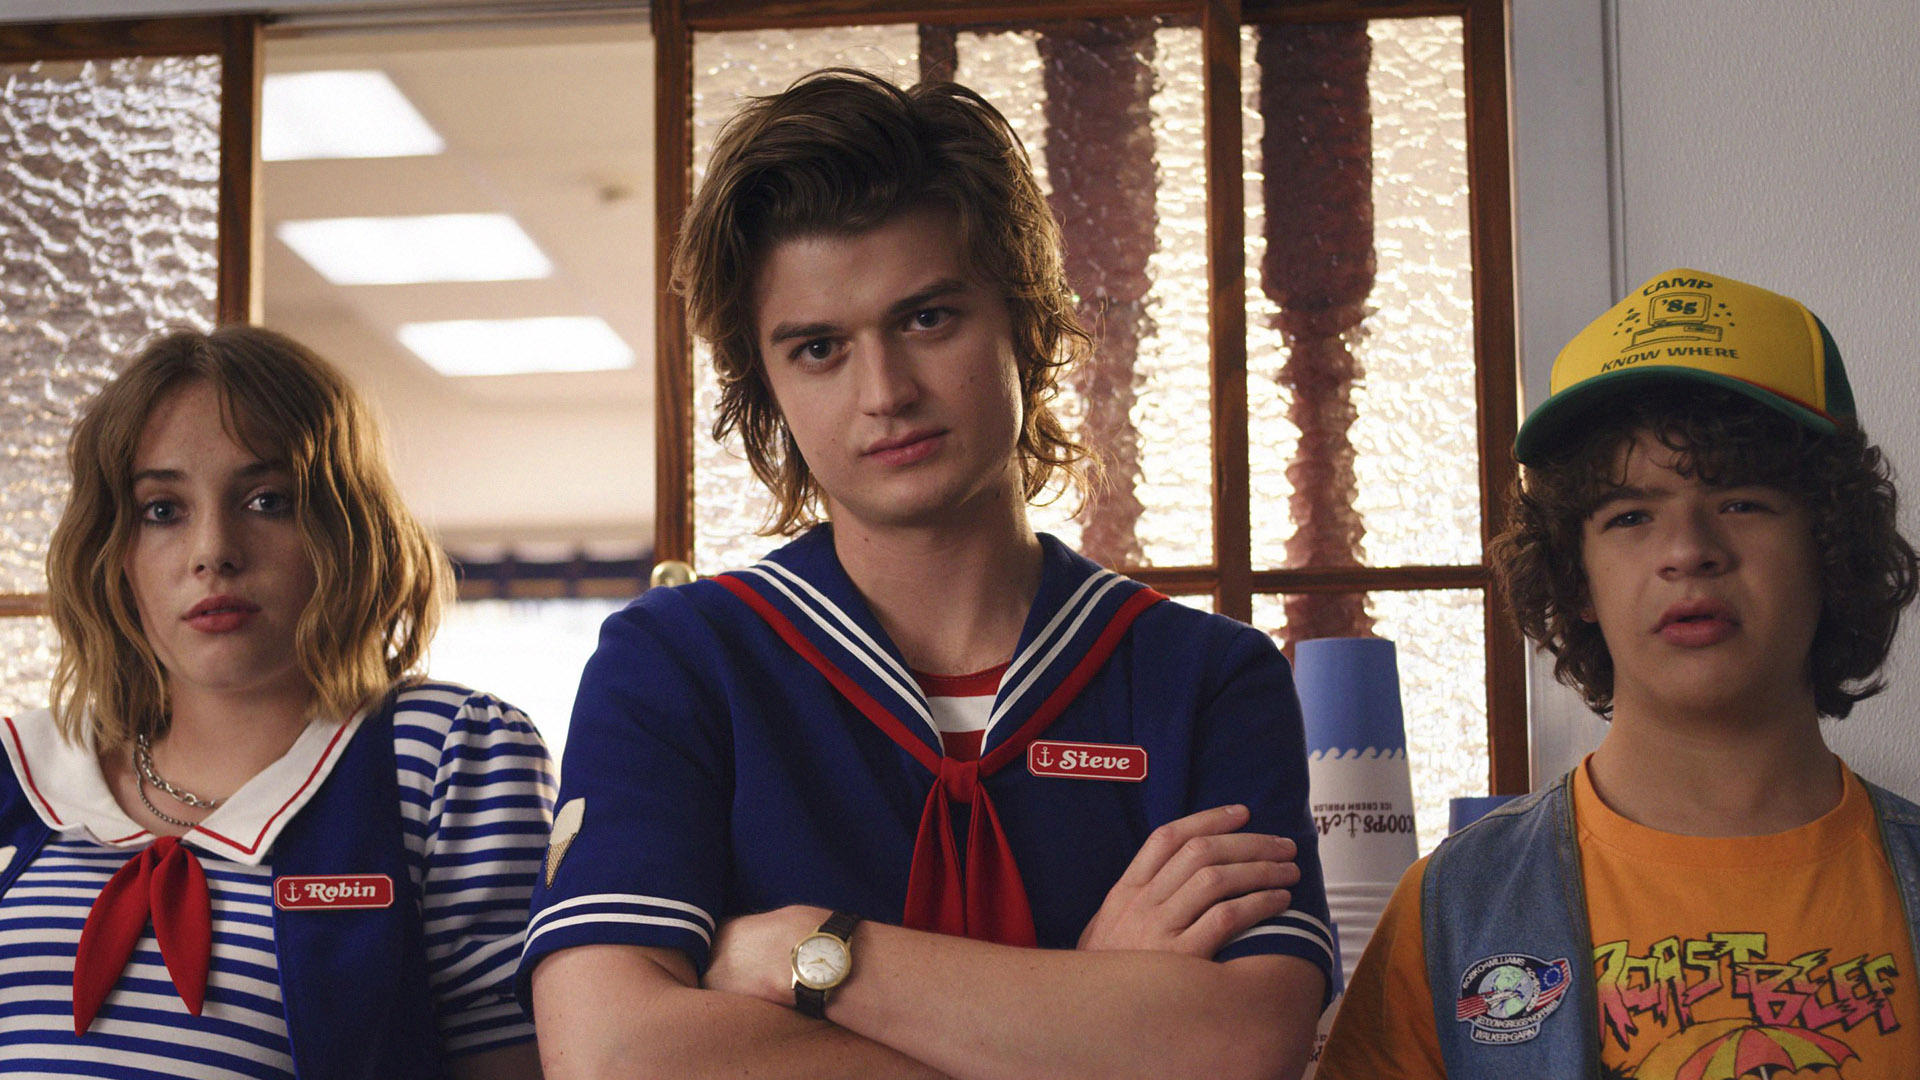 Stranger Things Fans, You Have to Check Out Joe Keery's New TV Look